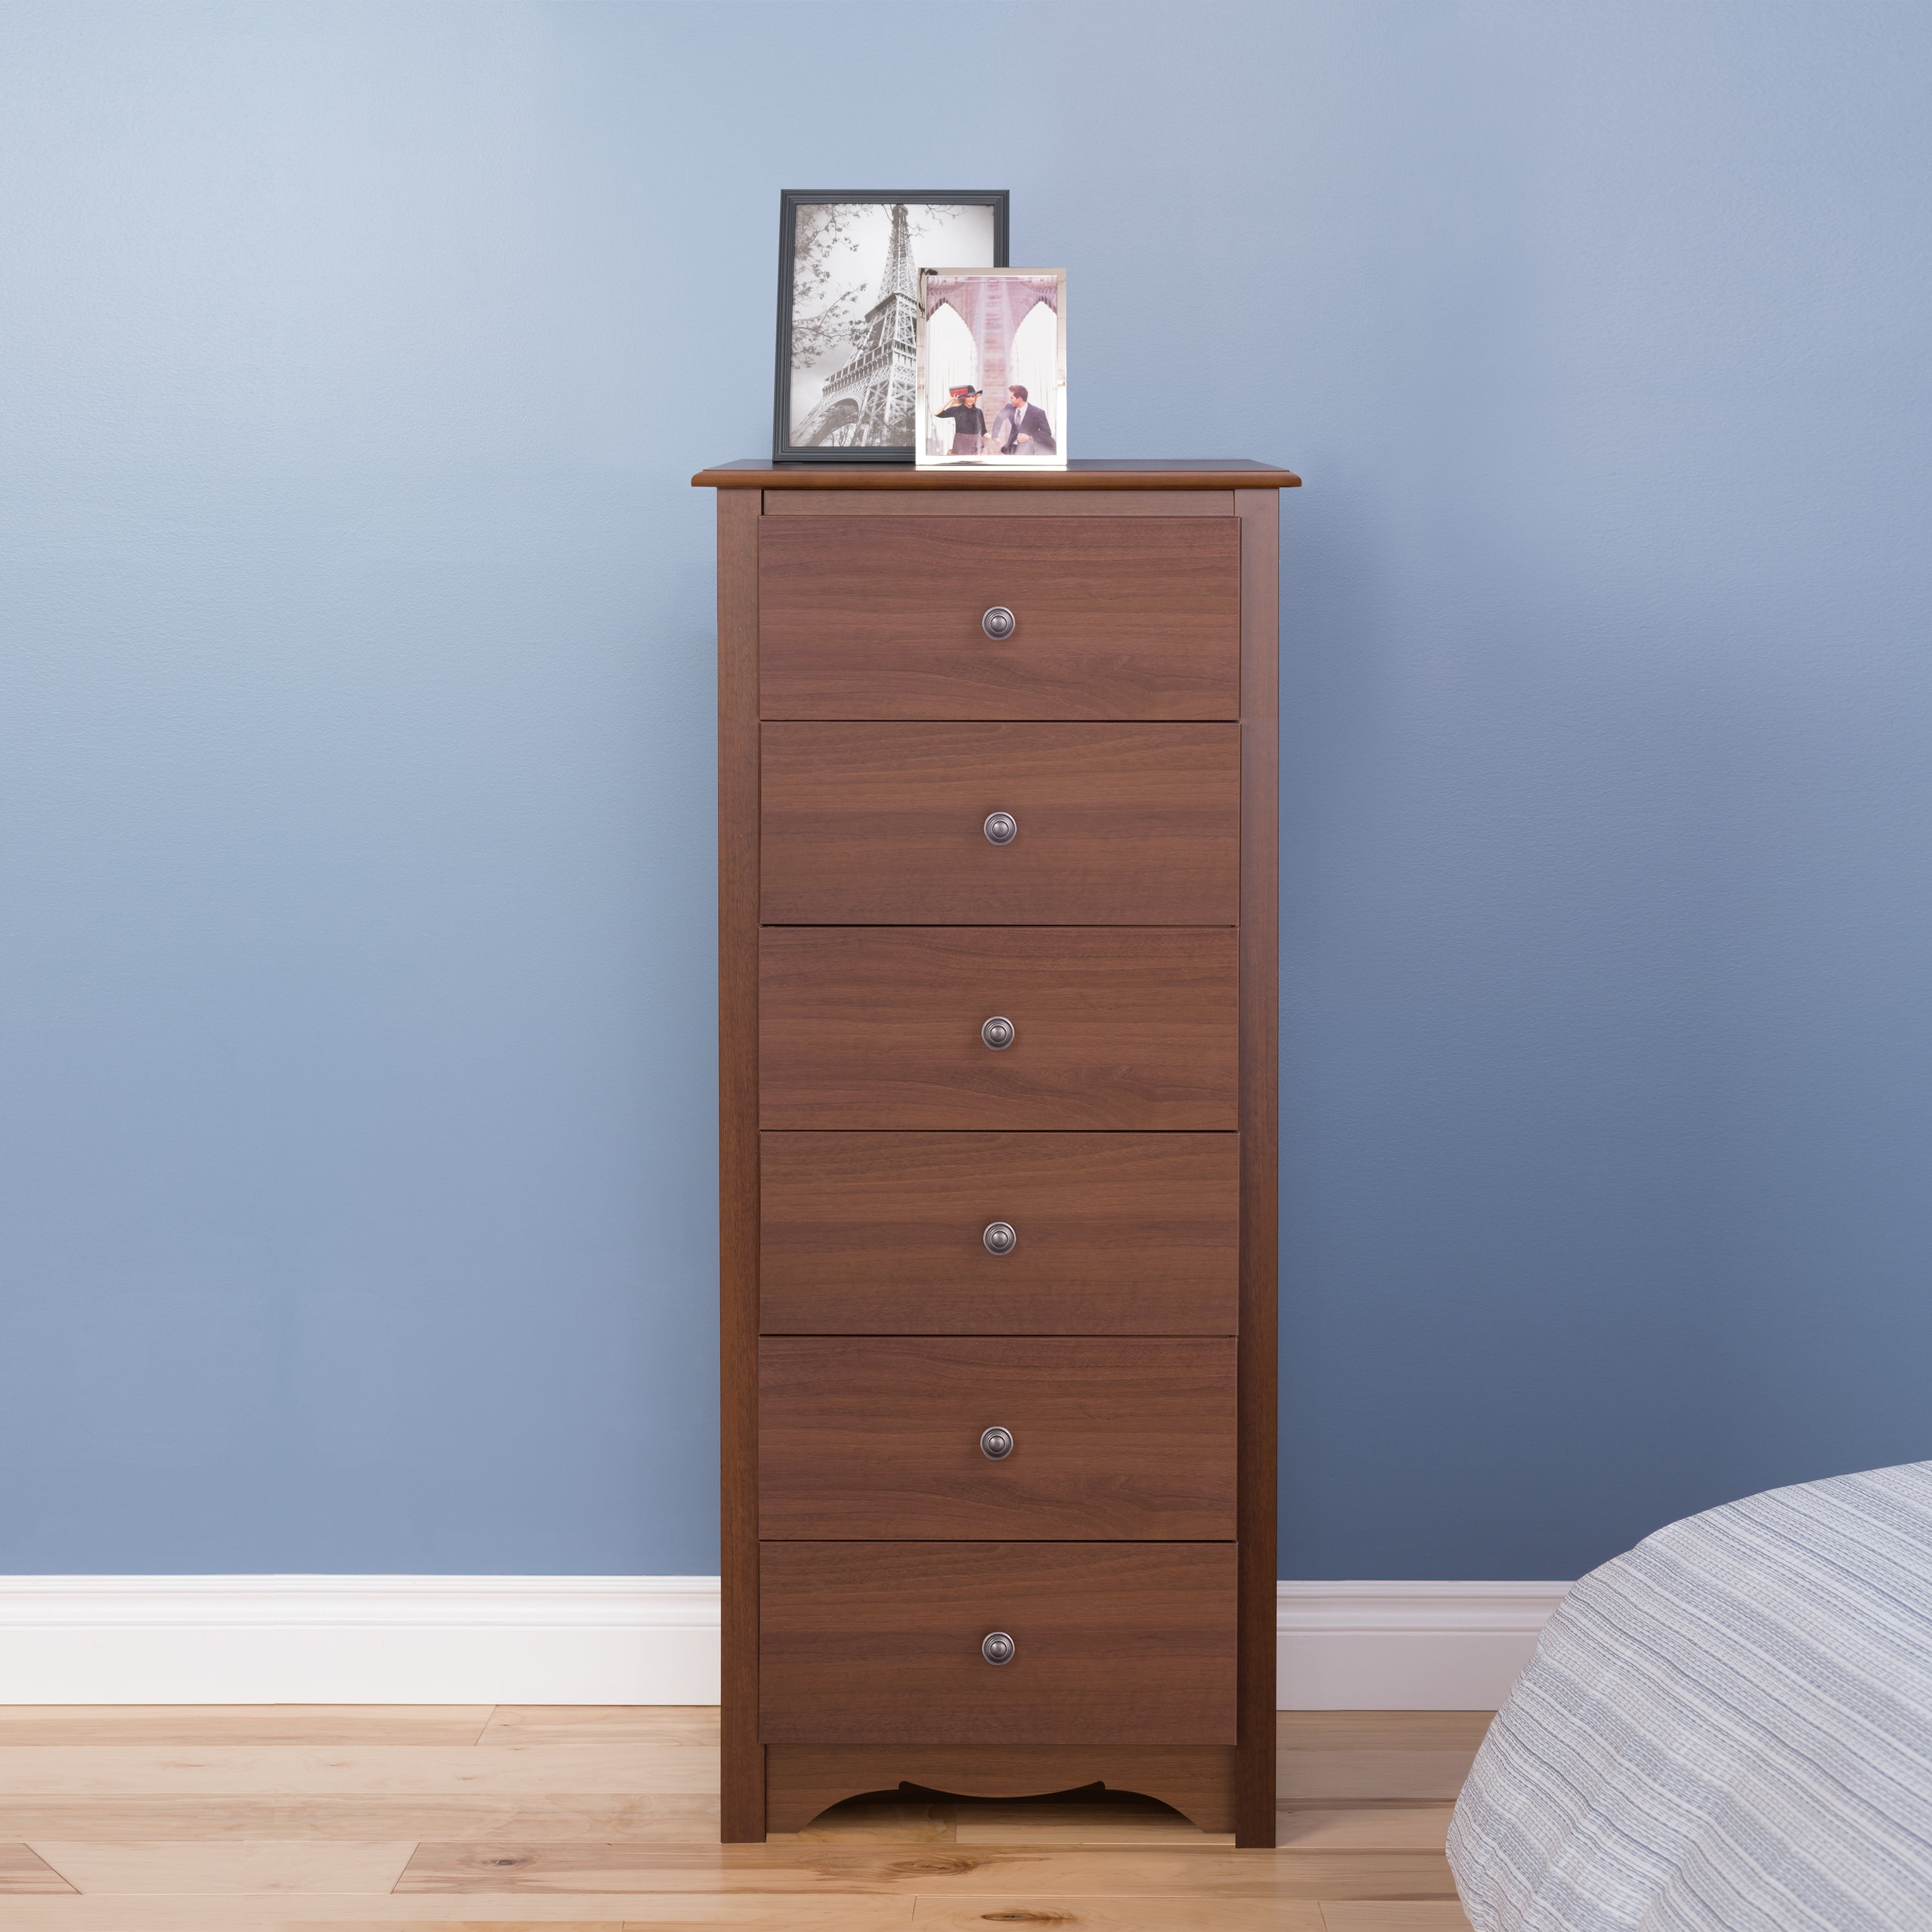 Monterey Tall 6 Drawer Dresser, Dresser With Colored Drawers